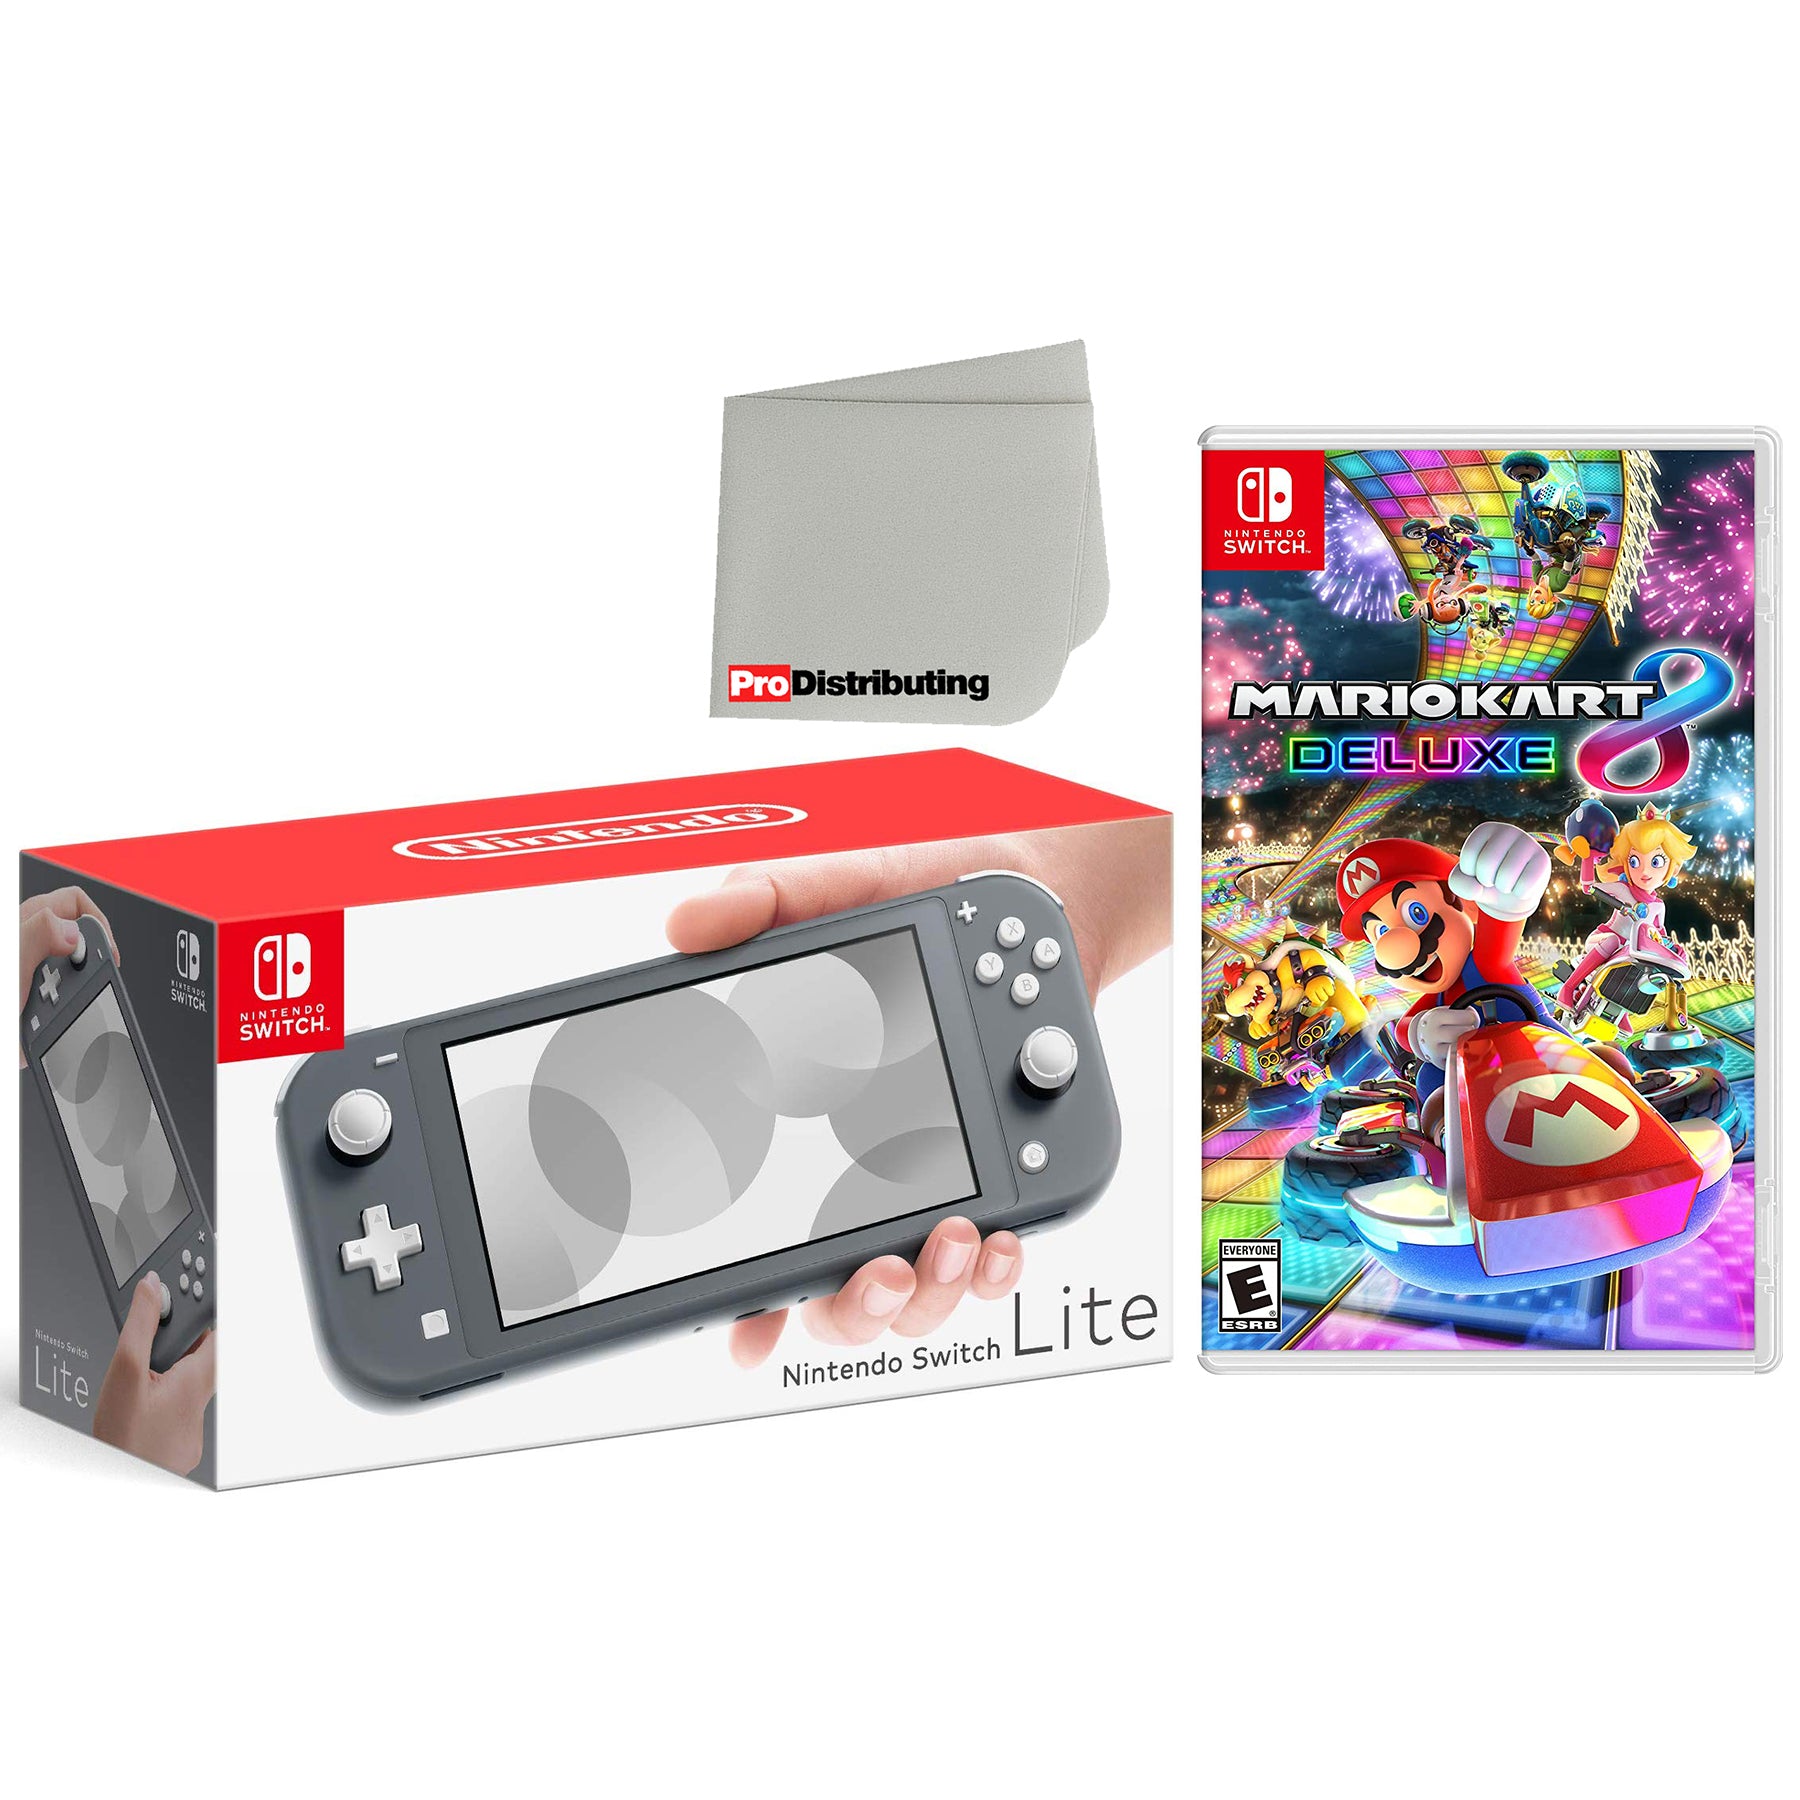 Nintendo Switch Lite 32GB Handheld Video Game Console in Gray with Mario Kart 8 Deluxe Game Bundle - Pro-Distributing